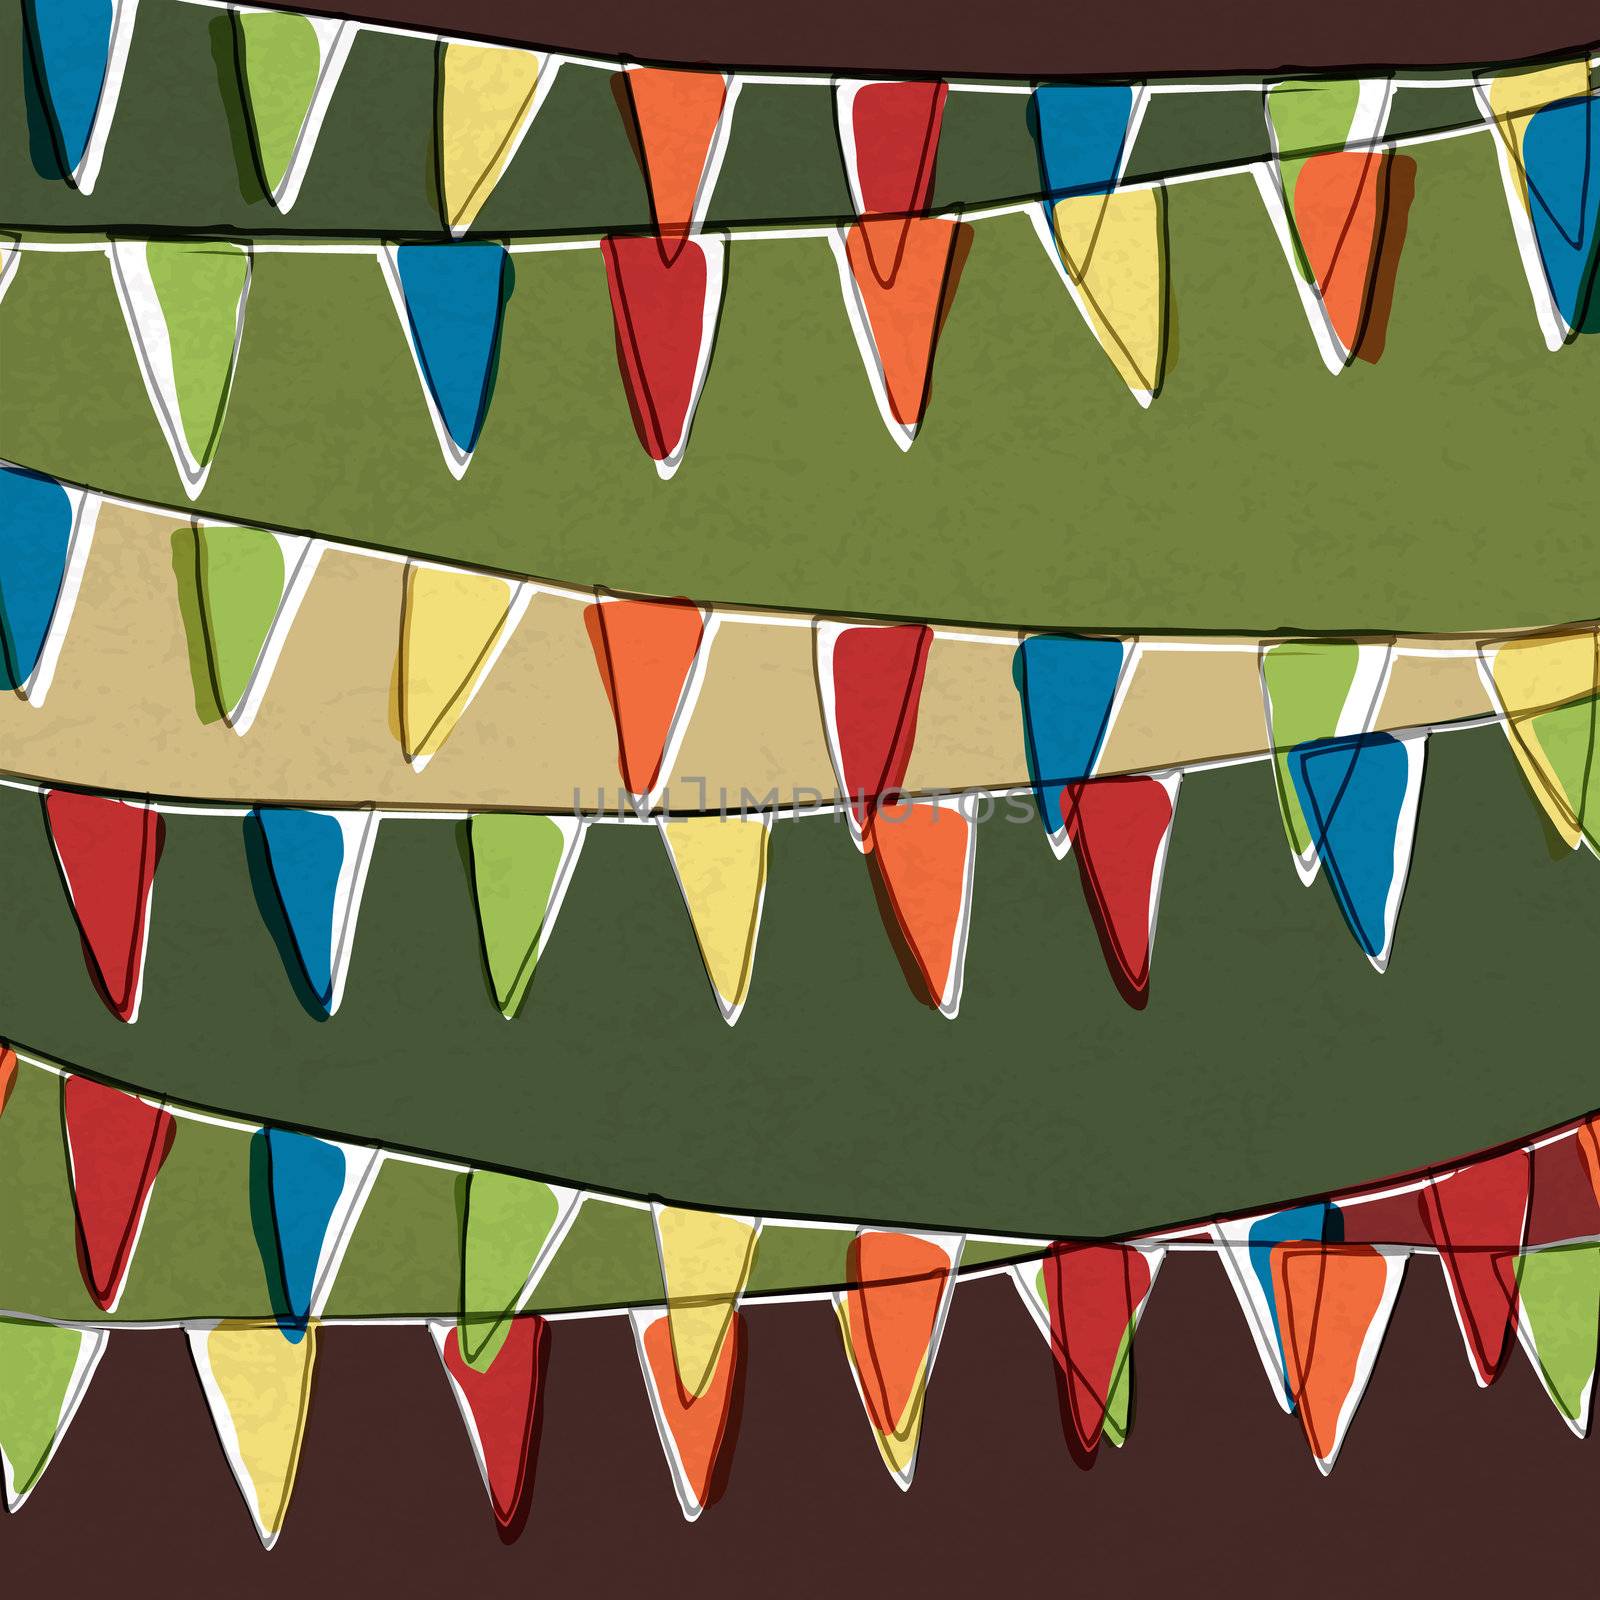 Party pennant bunting. Happy holiday background, vector, EPS10